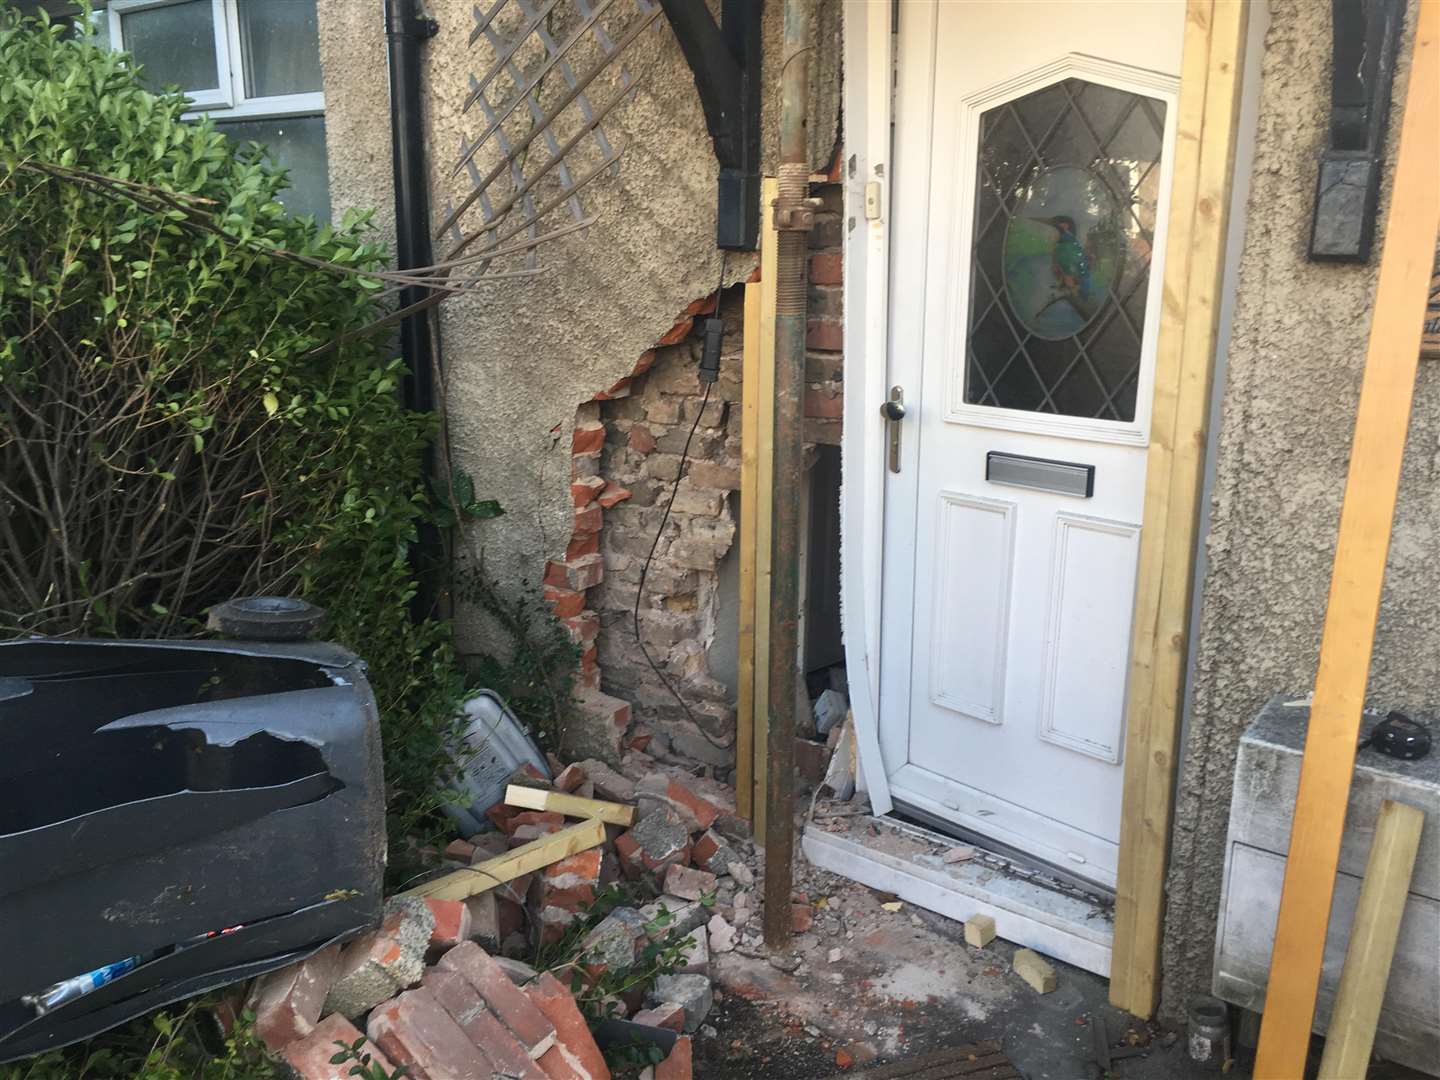 The damage caused to the house in Sturry Road. (4758687)